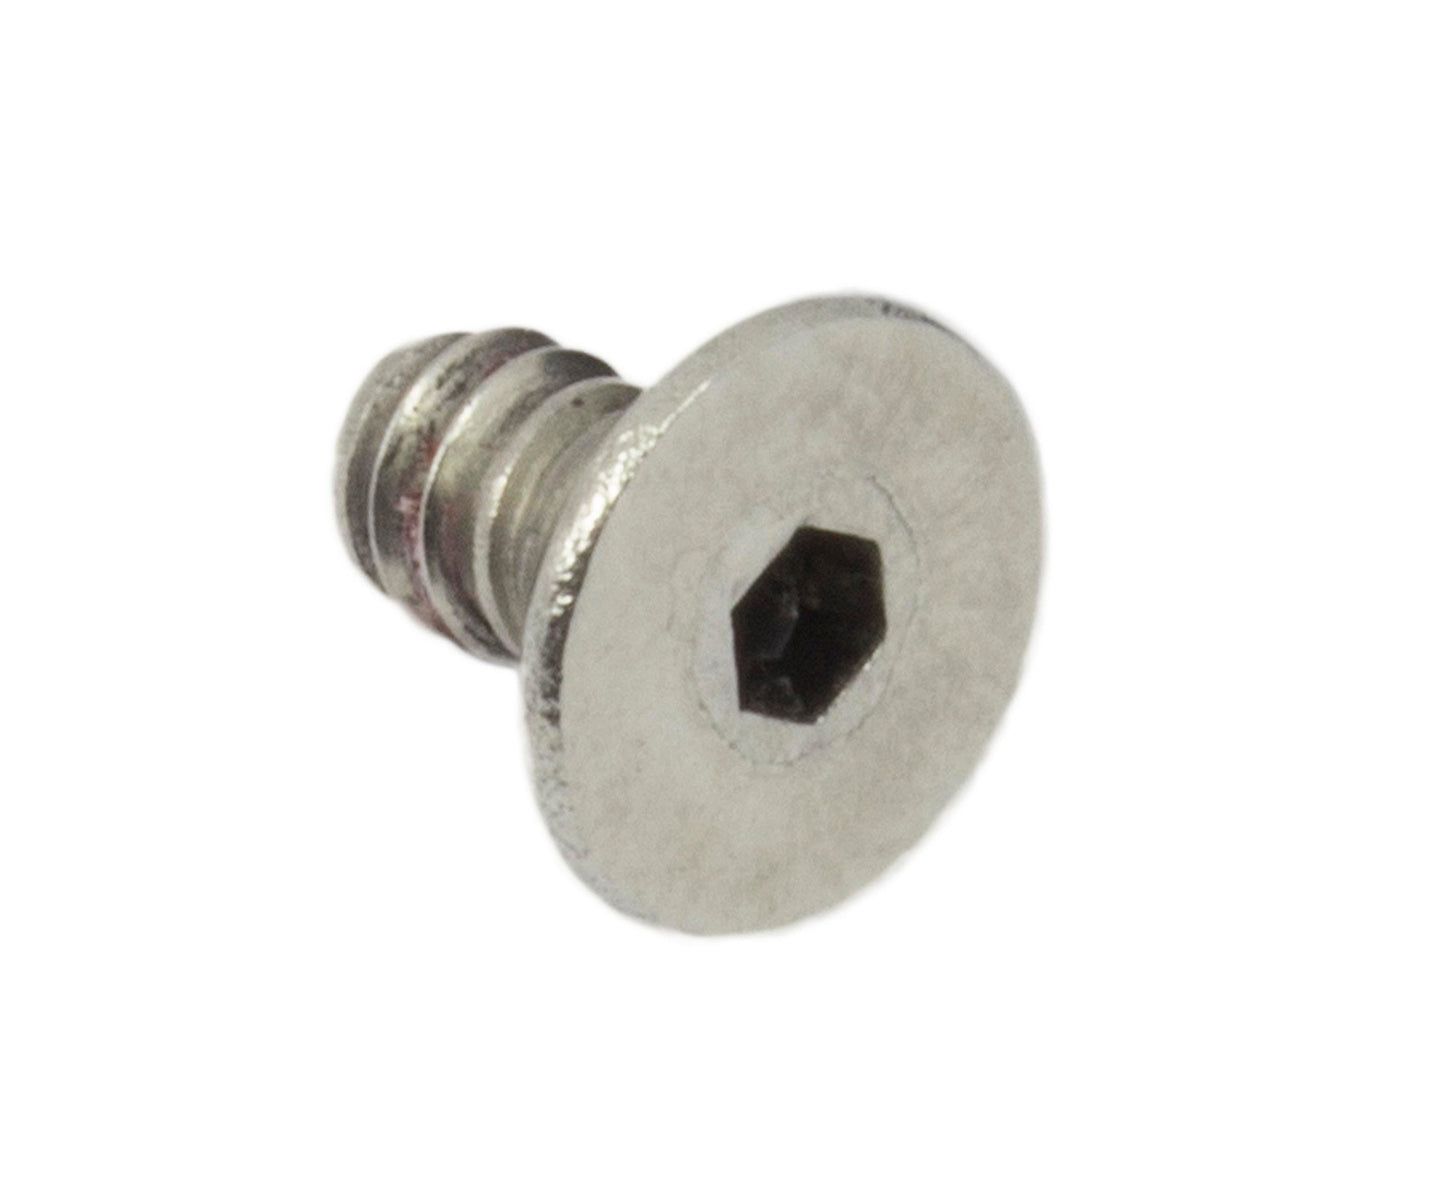 Eclipse Countersunk Screw - 6-32 UNC x 1/4 inch - Patched (CS2)